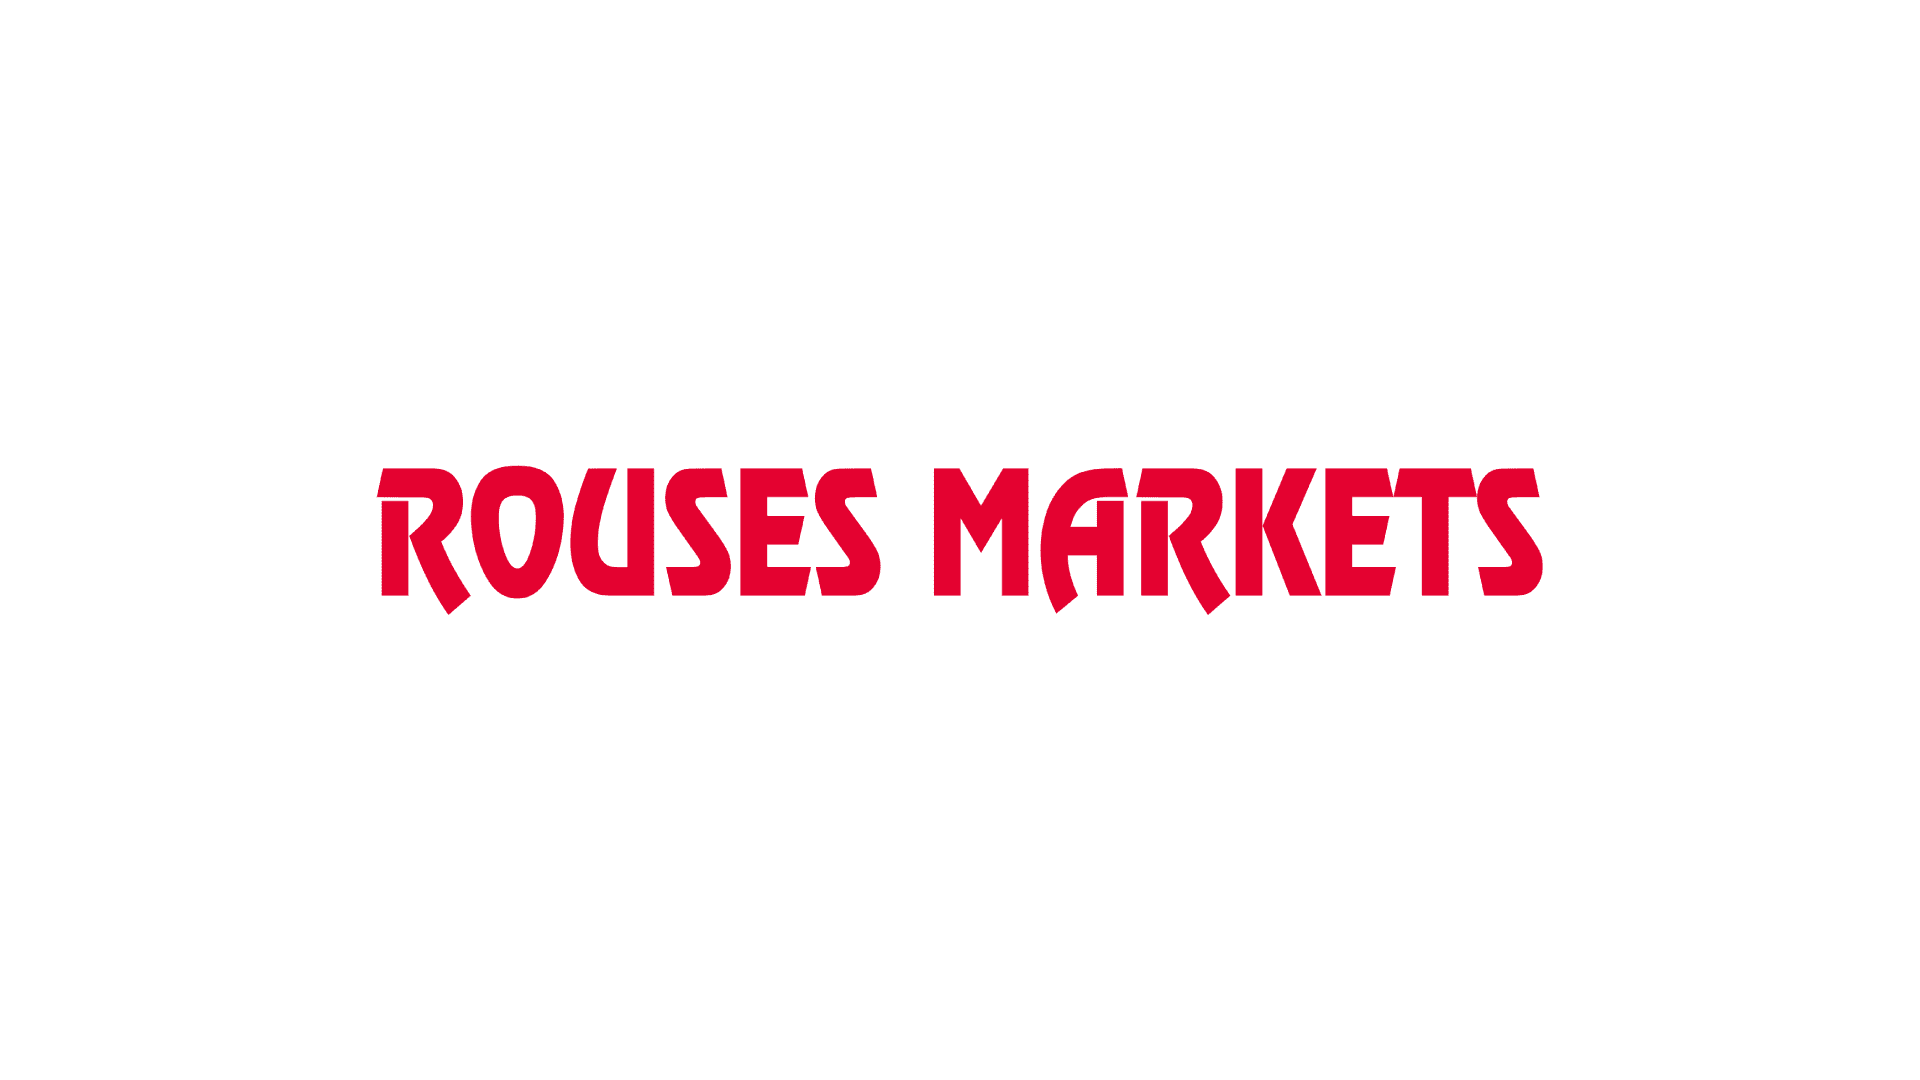 Rouses Markets works with CADS